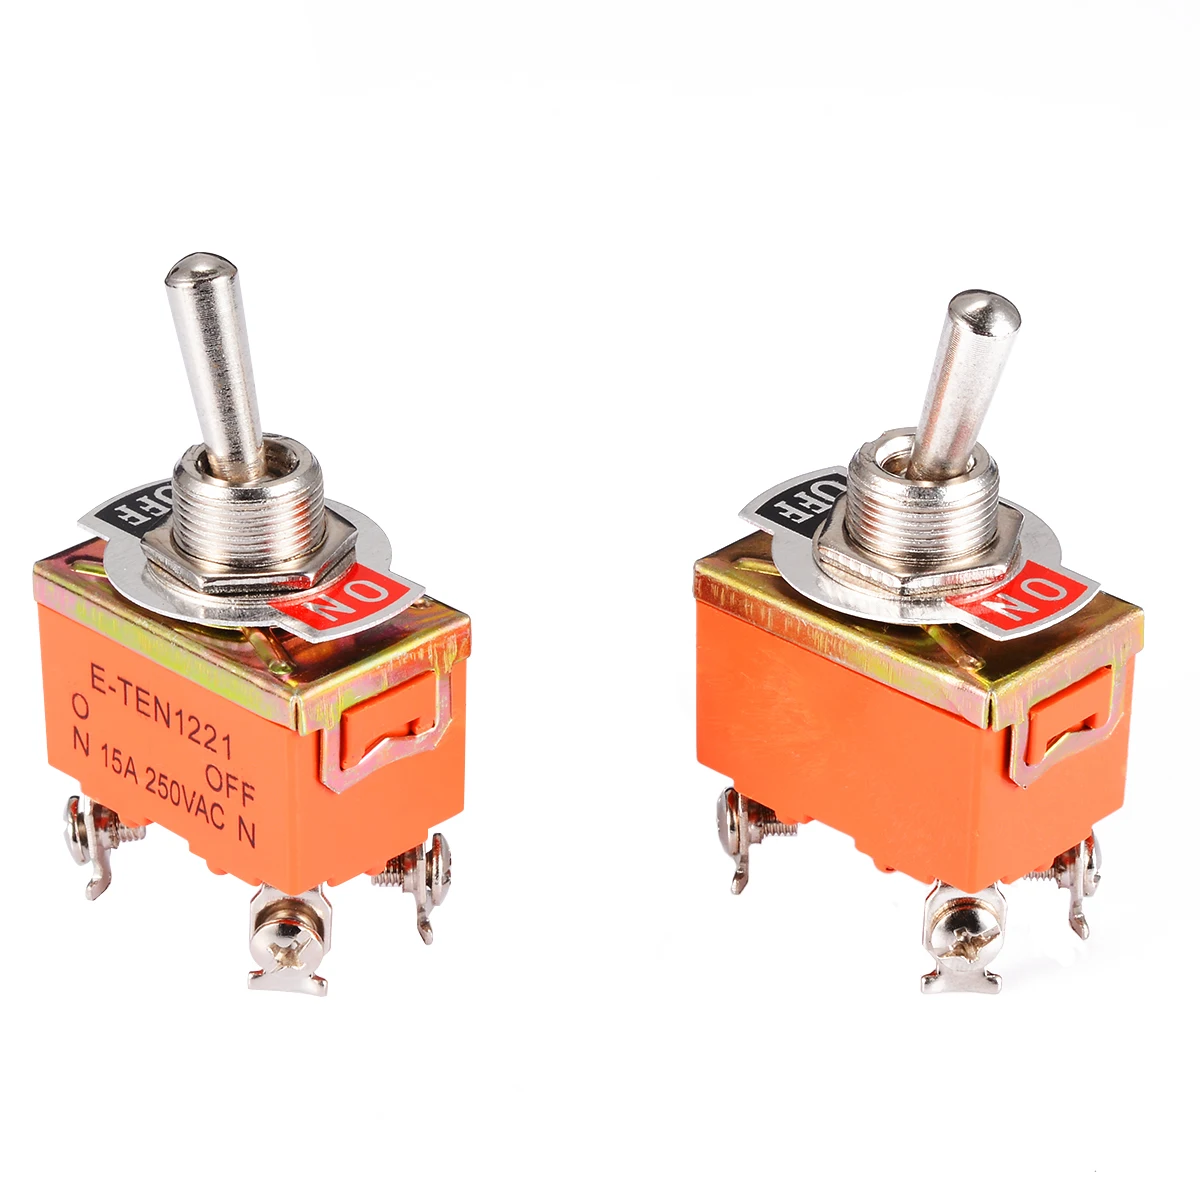 

2PCS Mini Toggle Switch AC 250V 15A Amps On/Off 2 Positions DPST 4 Screw Electric Terminals Toggle Switches